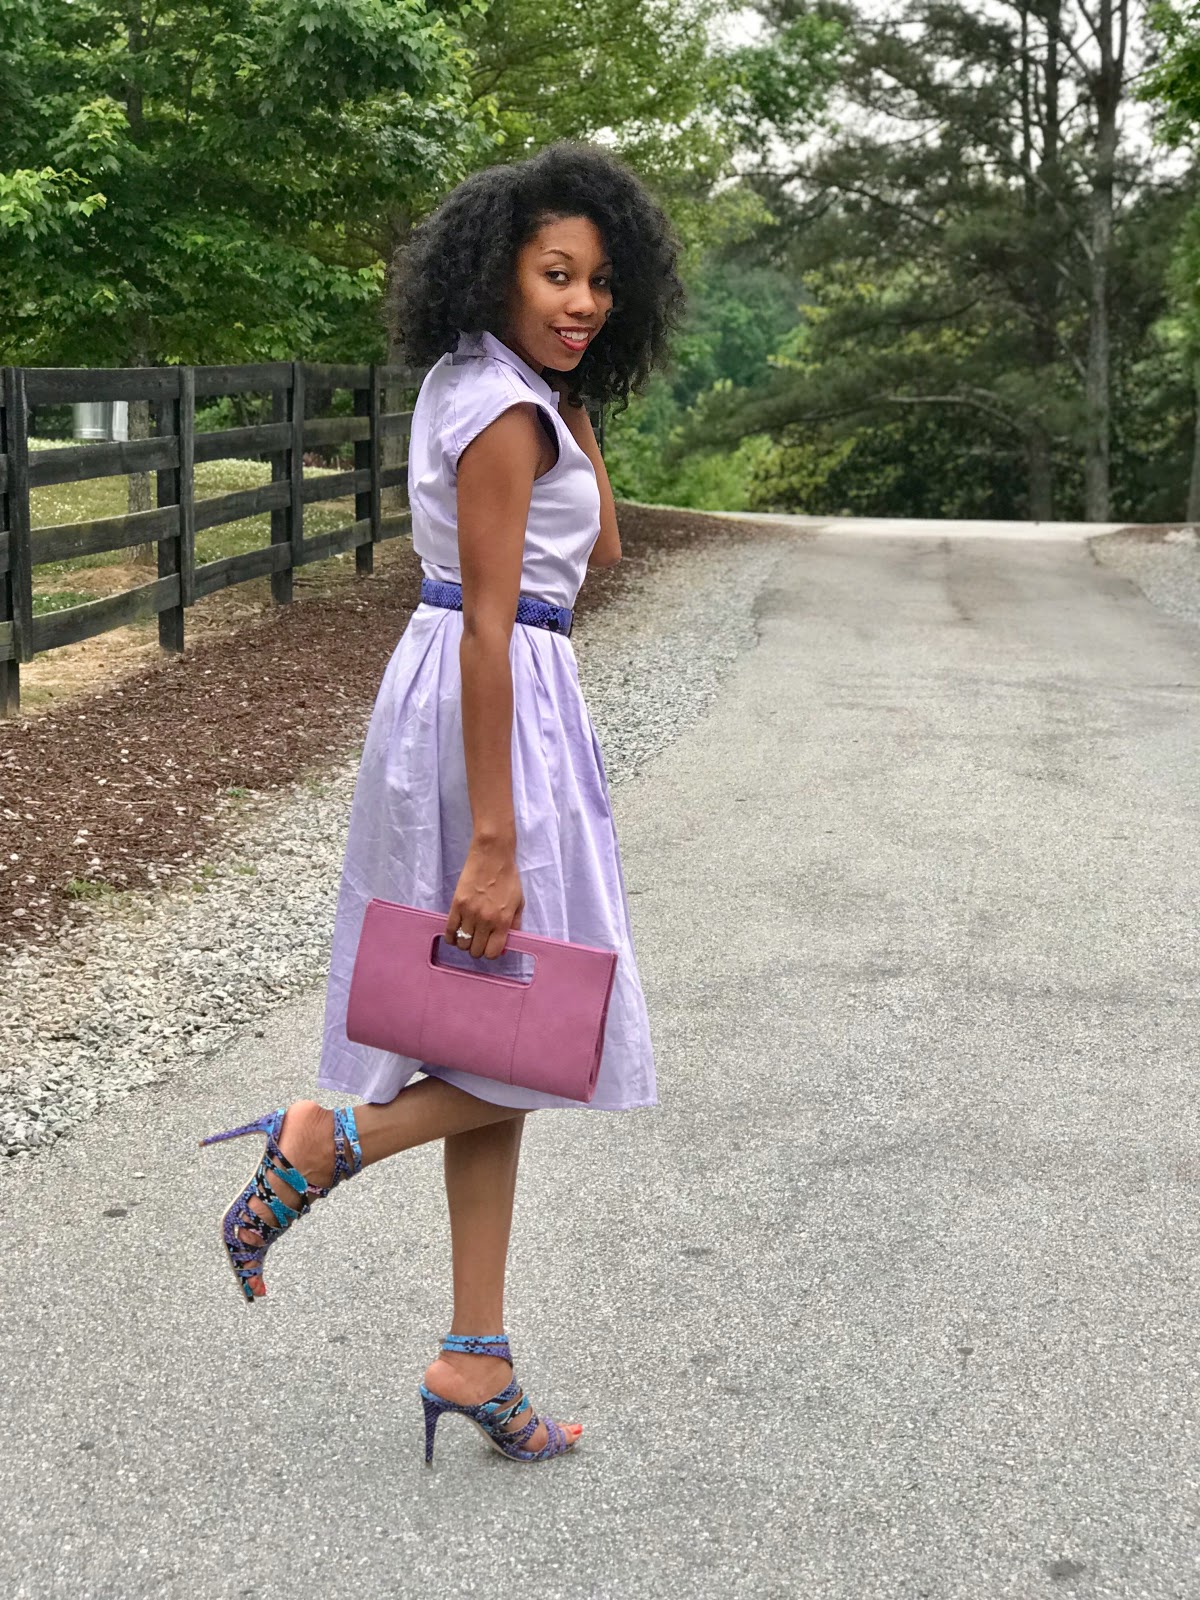 Curlybyrdie Chirps: Serving Spring Looks with the Eva Mendes Collection